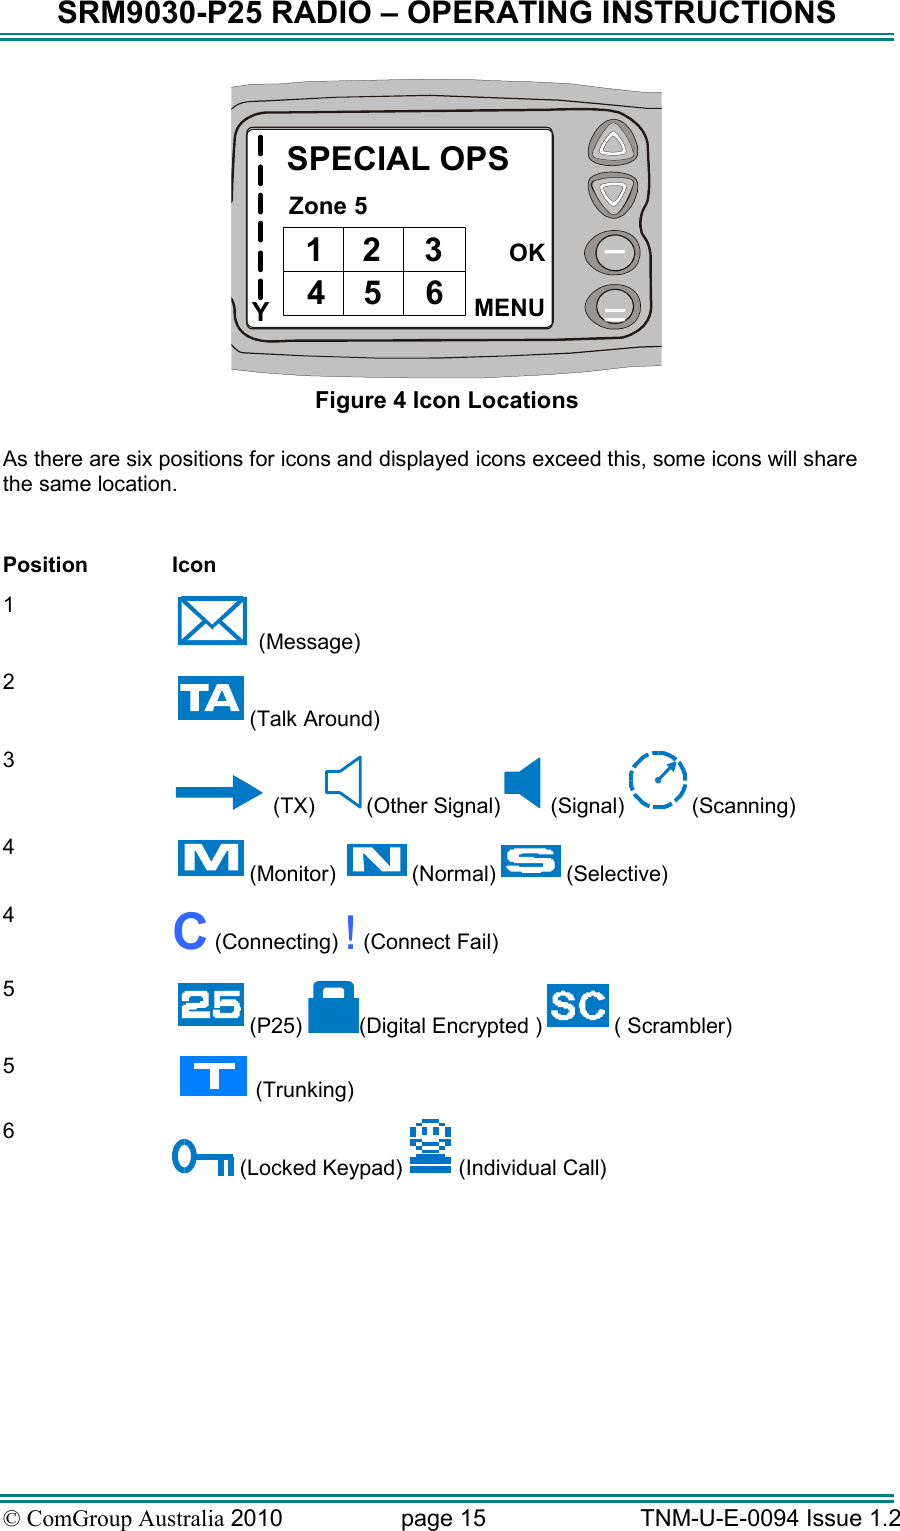 SRM9030-P25 RADIO – OPERATING INSTRUCTIONS © ComGroup Australia 2010  page 15   TNM-U-E-0094 Issue 1.2 YSPECIAL OPSZone 5OKMENU1 2 3654 Figure 4 Icon Locations  As there are six positions for icons and displayed icons exceed this, some icons will share the same location.  Position  Icon 1  (Message) 2 (Talk Around) 3  (TX)  (Other Signal)  (Signal) (Scanning) 4 (Monitor)  (Normal) (Selective) 4 C (Connecting) ! (Connect Fail) 5 (P25)  (Digital Encrypted ) ( Scrambler) 5   (Trunking) 6  (Locked Keypad)   (Individual Call)   